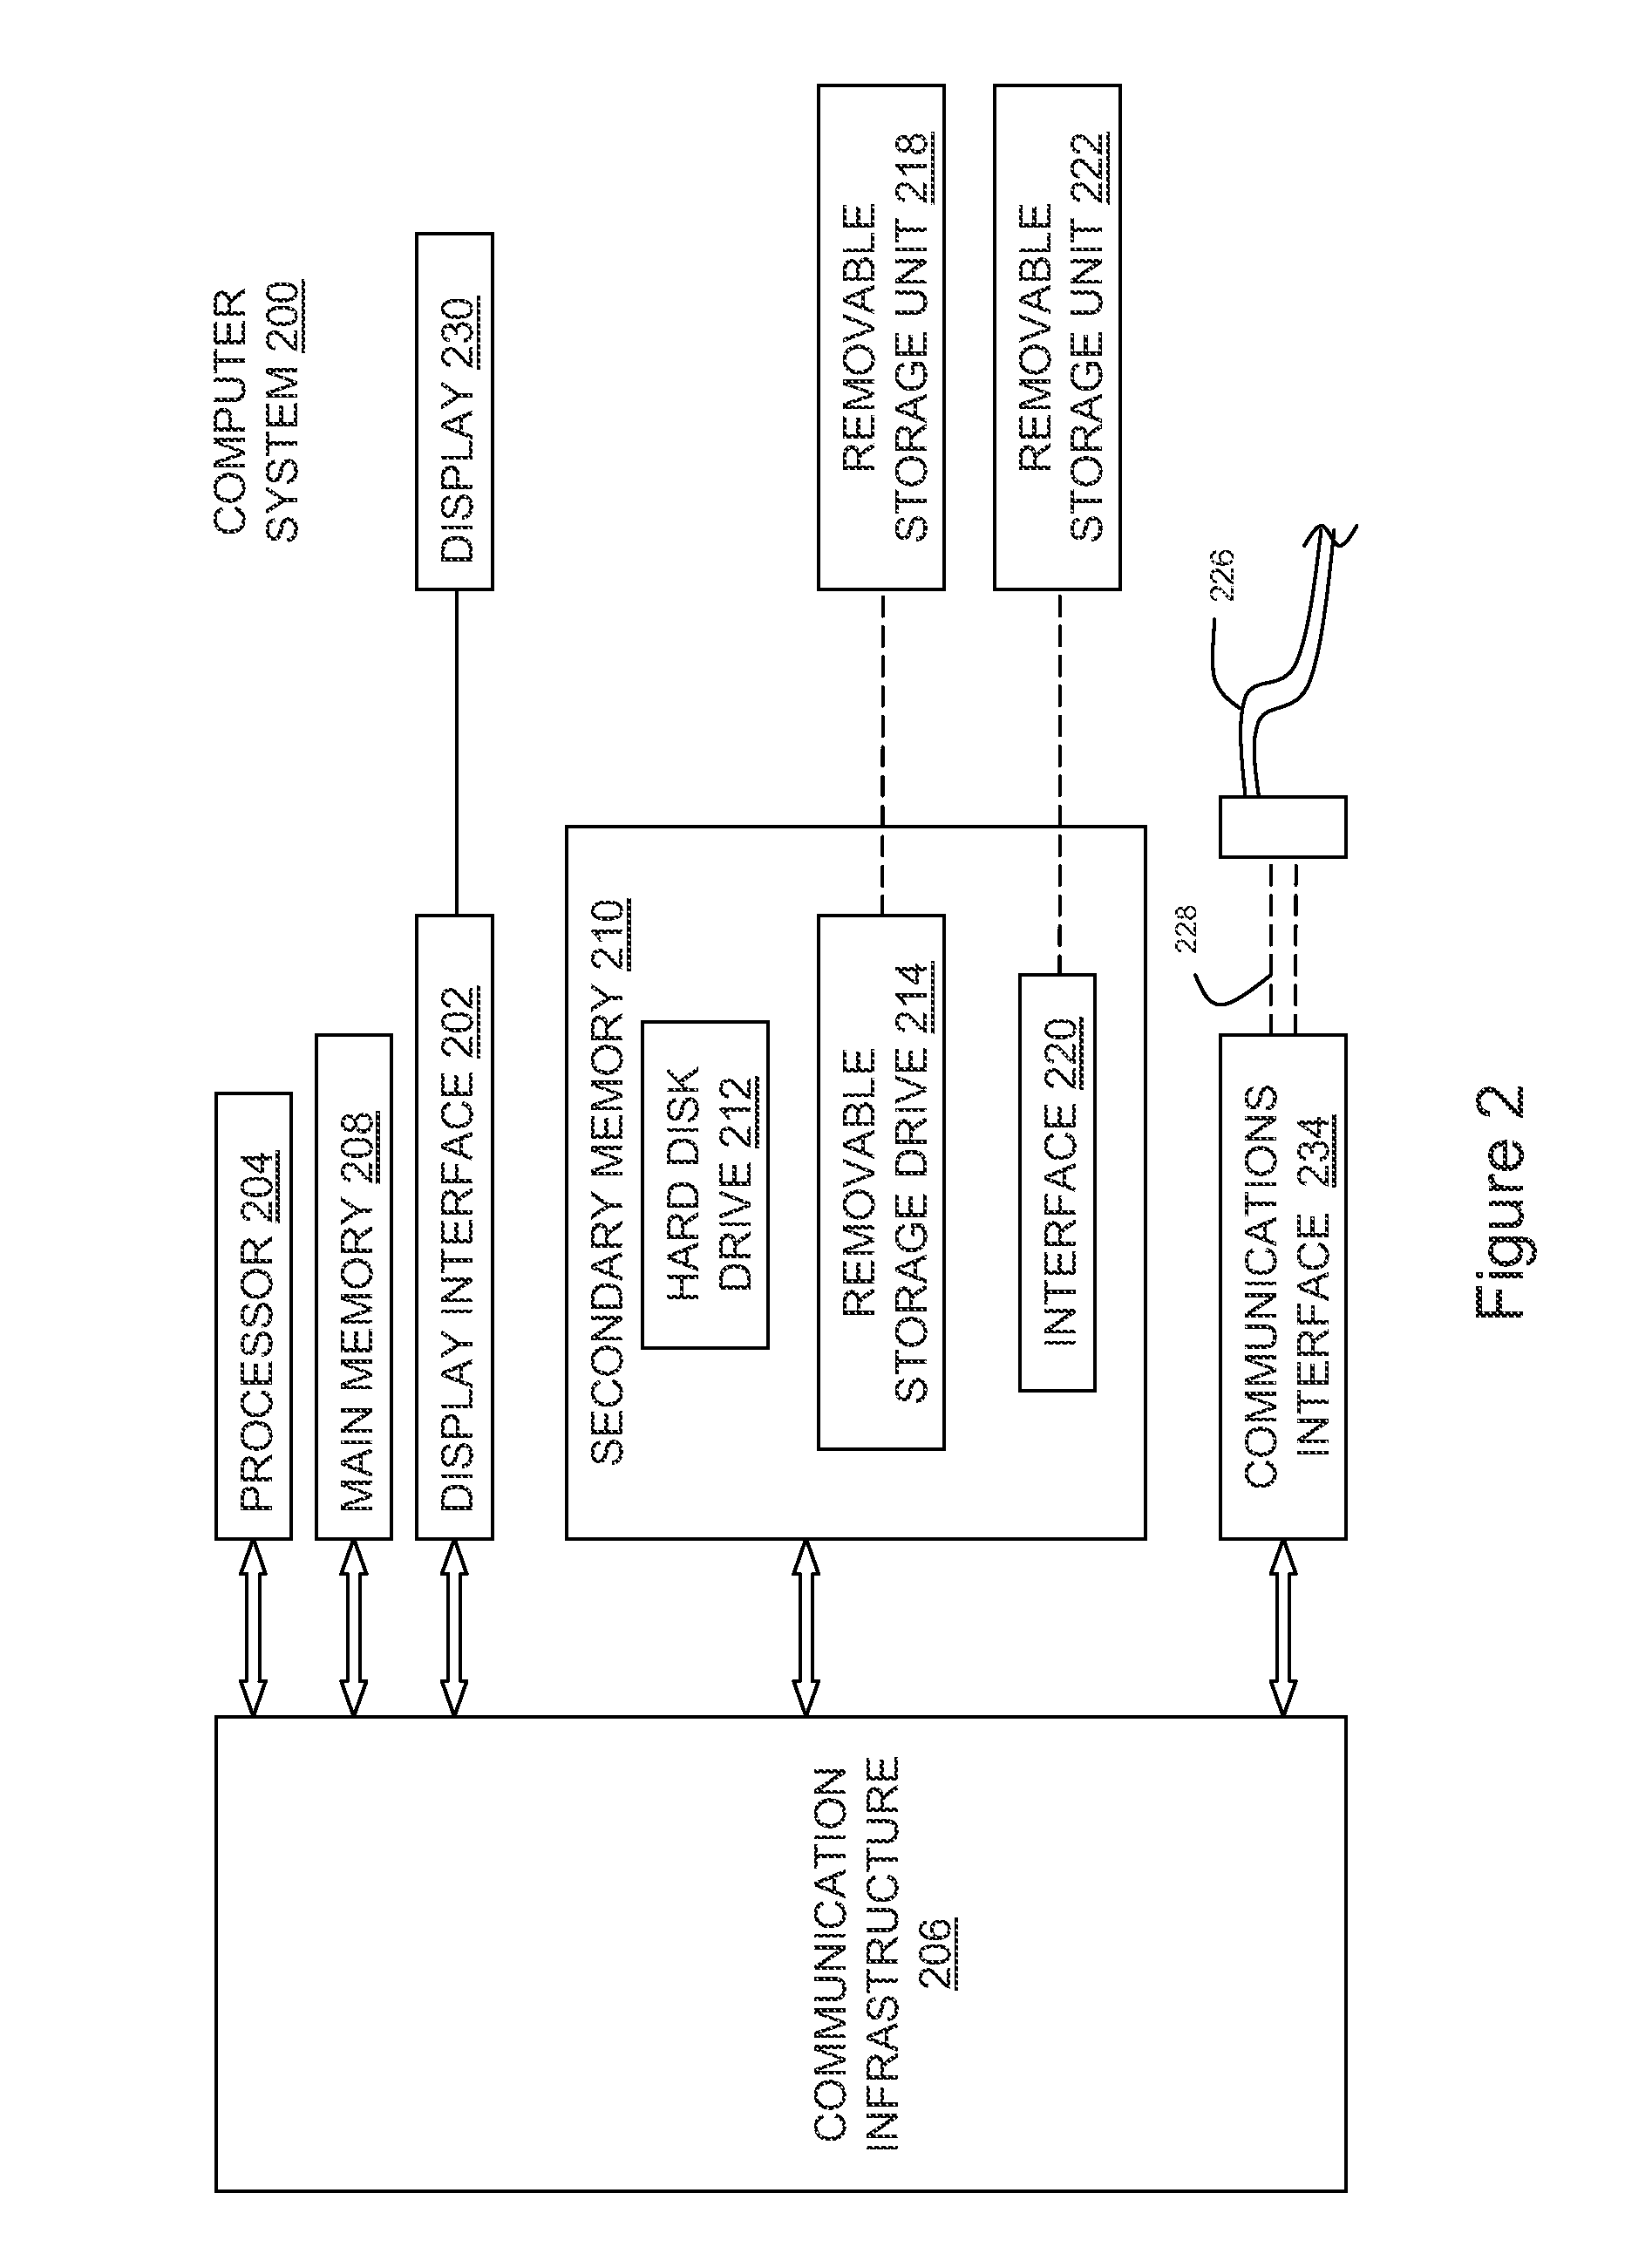 System, Method and Computer Program Product For Adjustment of Insulin Delivery in Diabetes Using Nominal Open-Loop Profiles